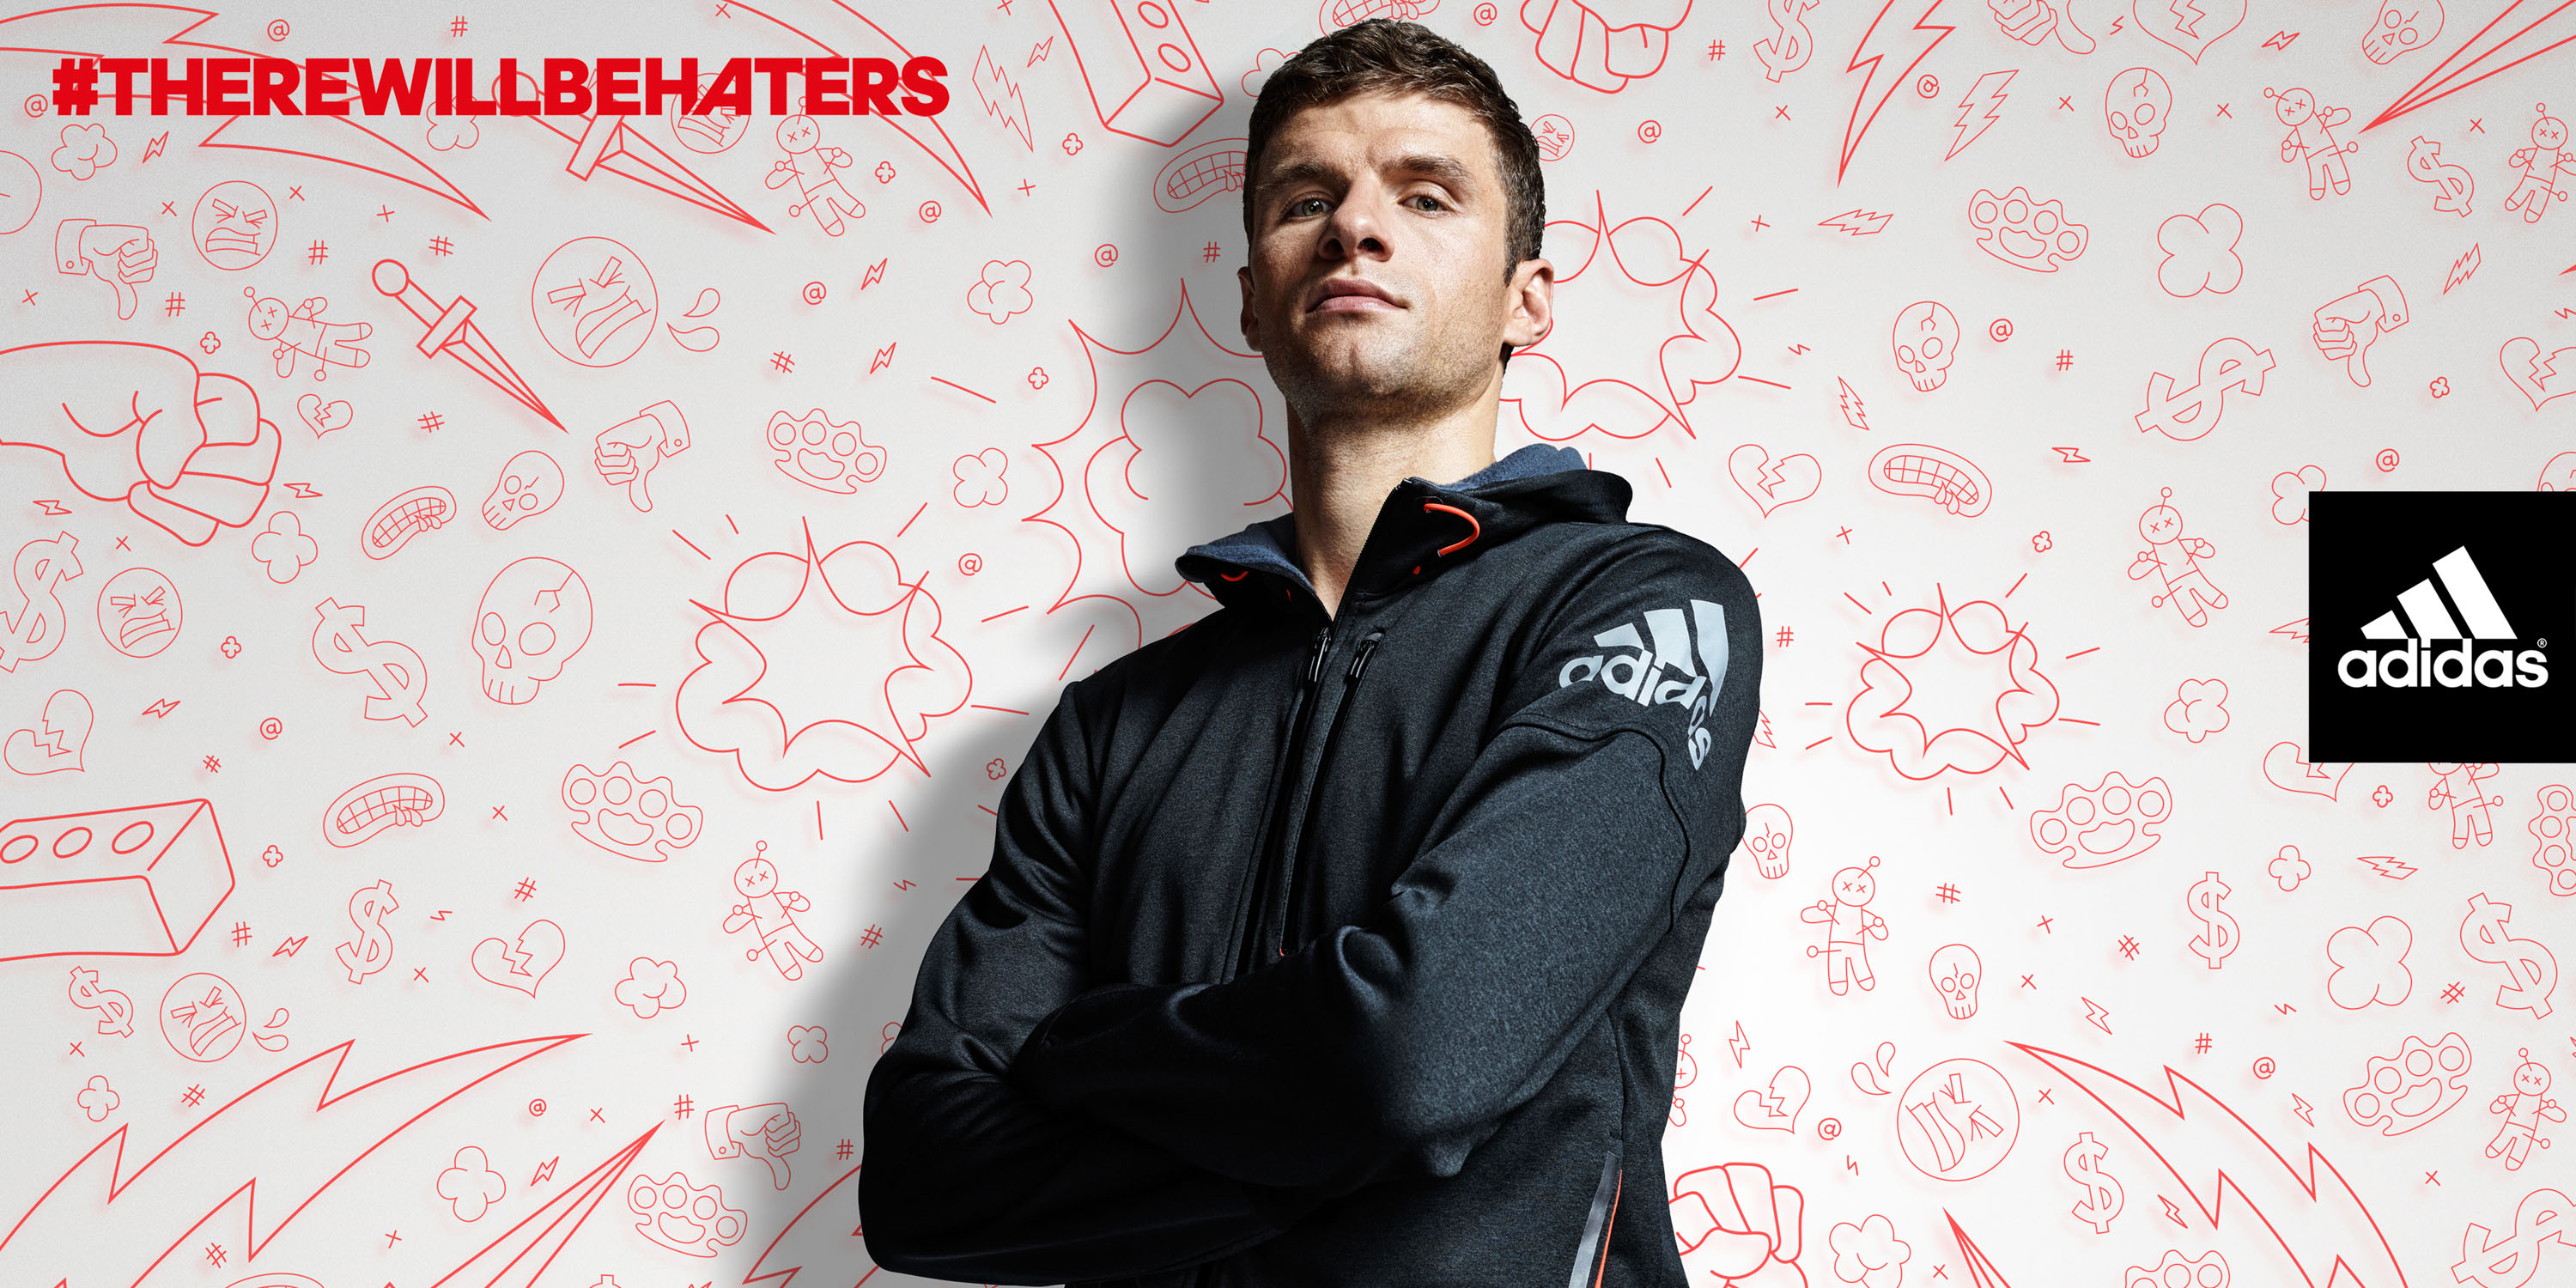 #There will be Haters Campaign, football, Thomas Müller, Detlef Schneider Photography